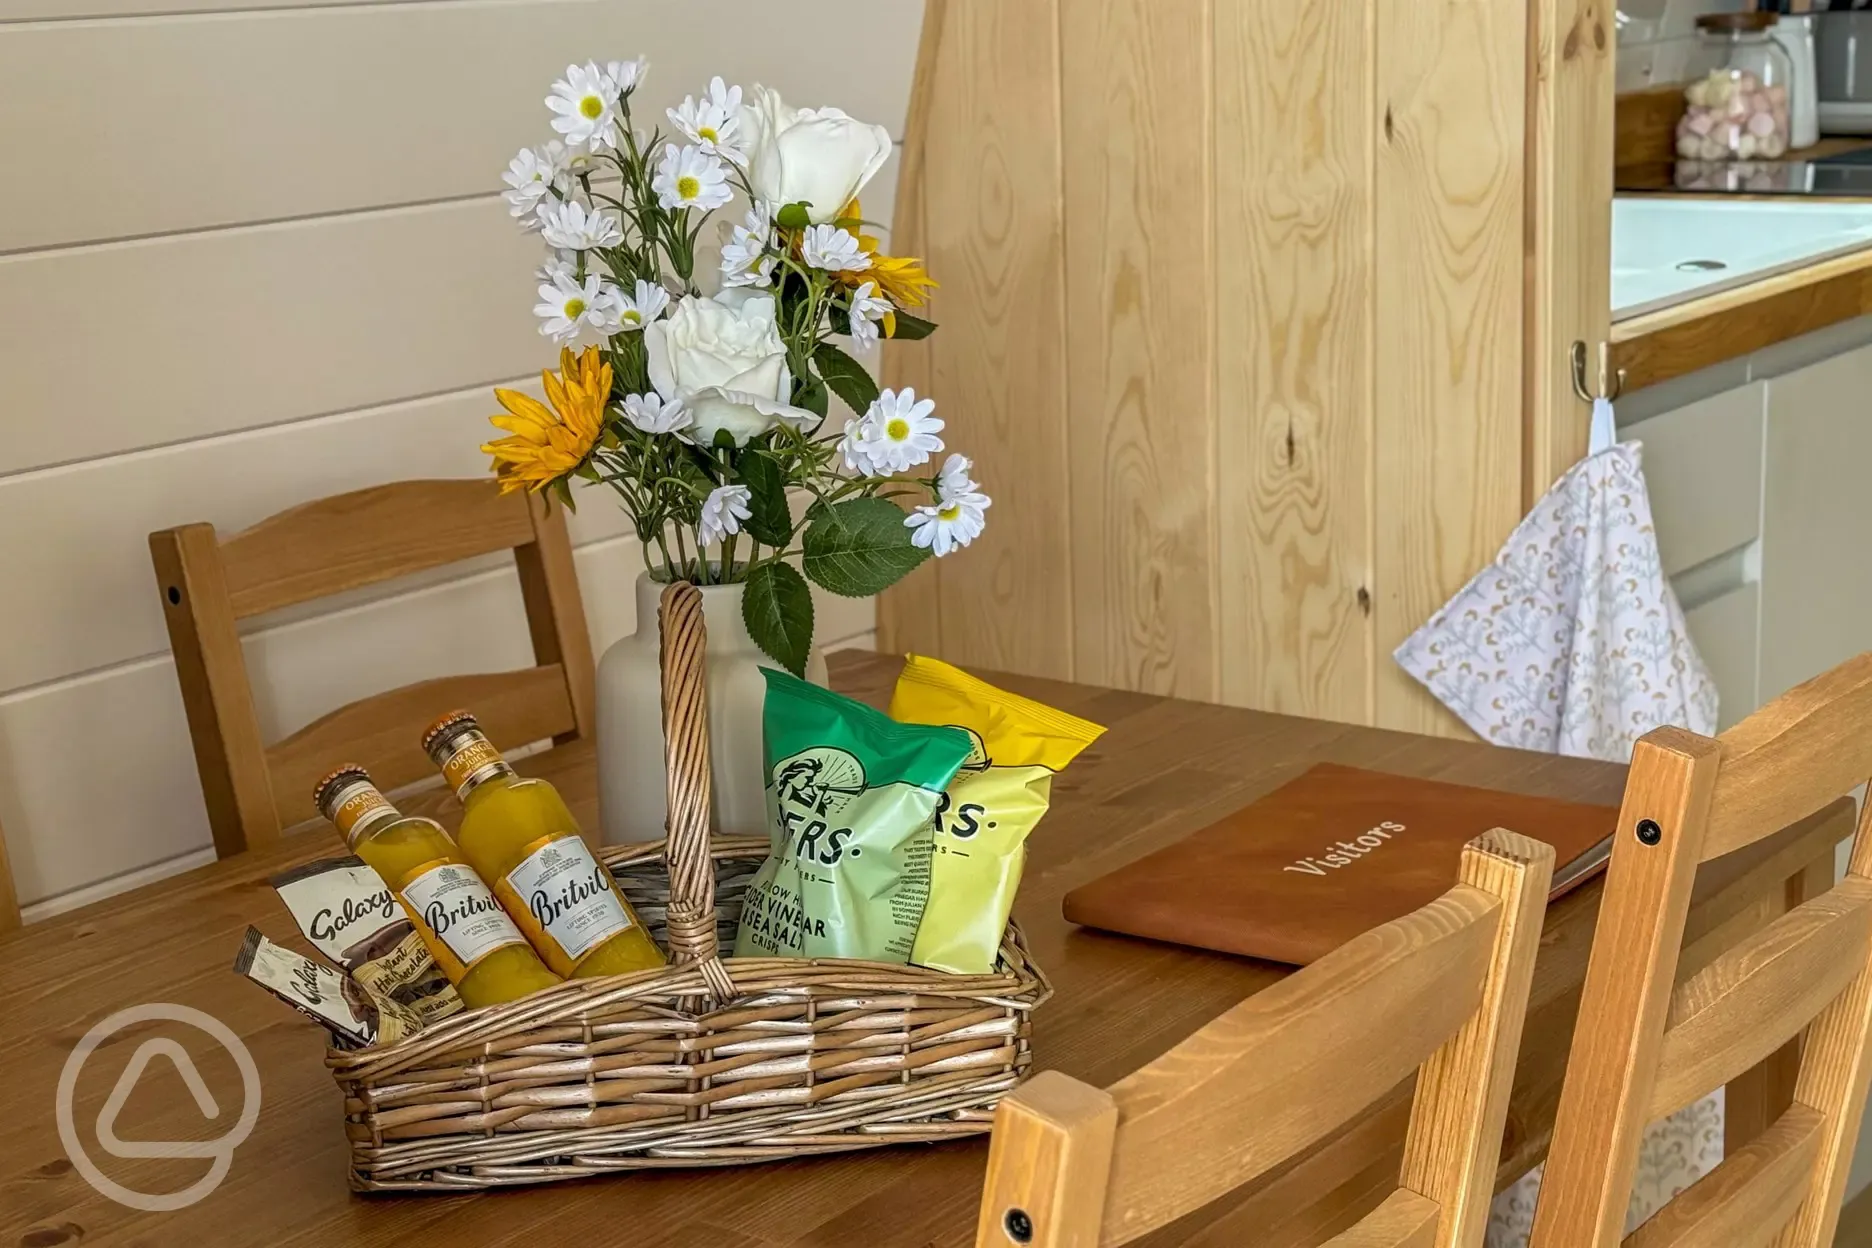 A welcome basket on arrival with milk, coffee and tea